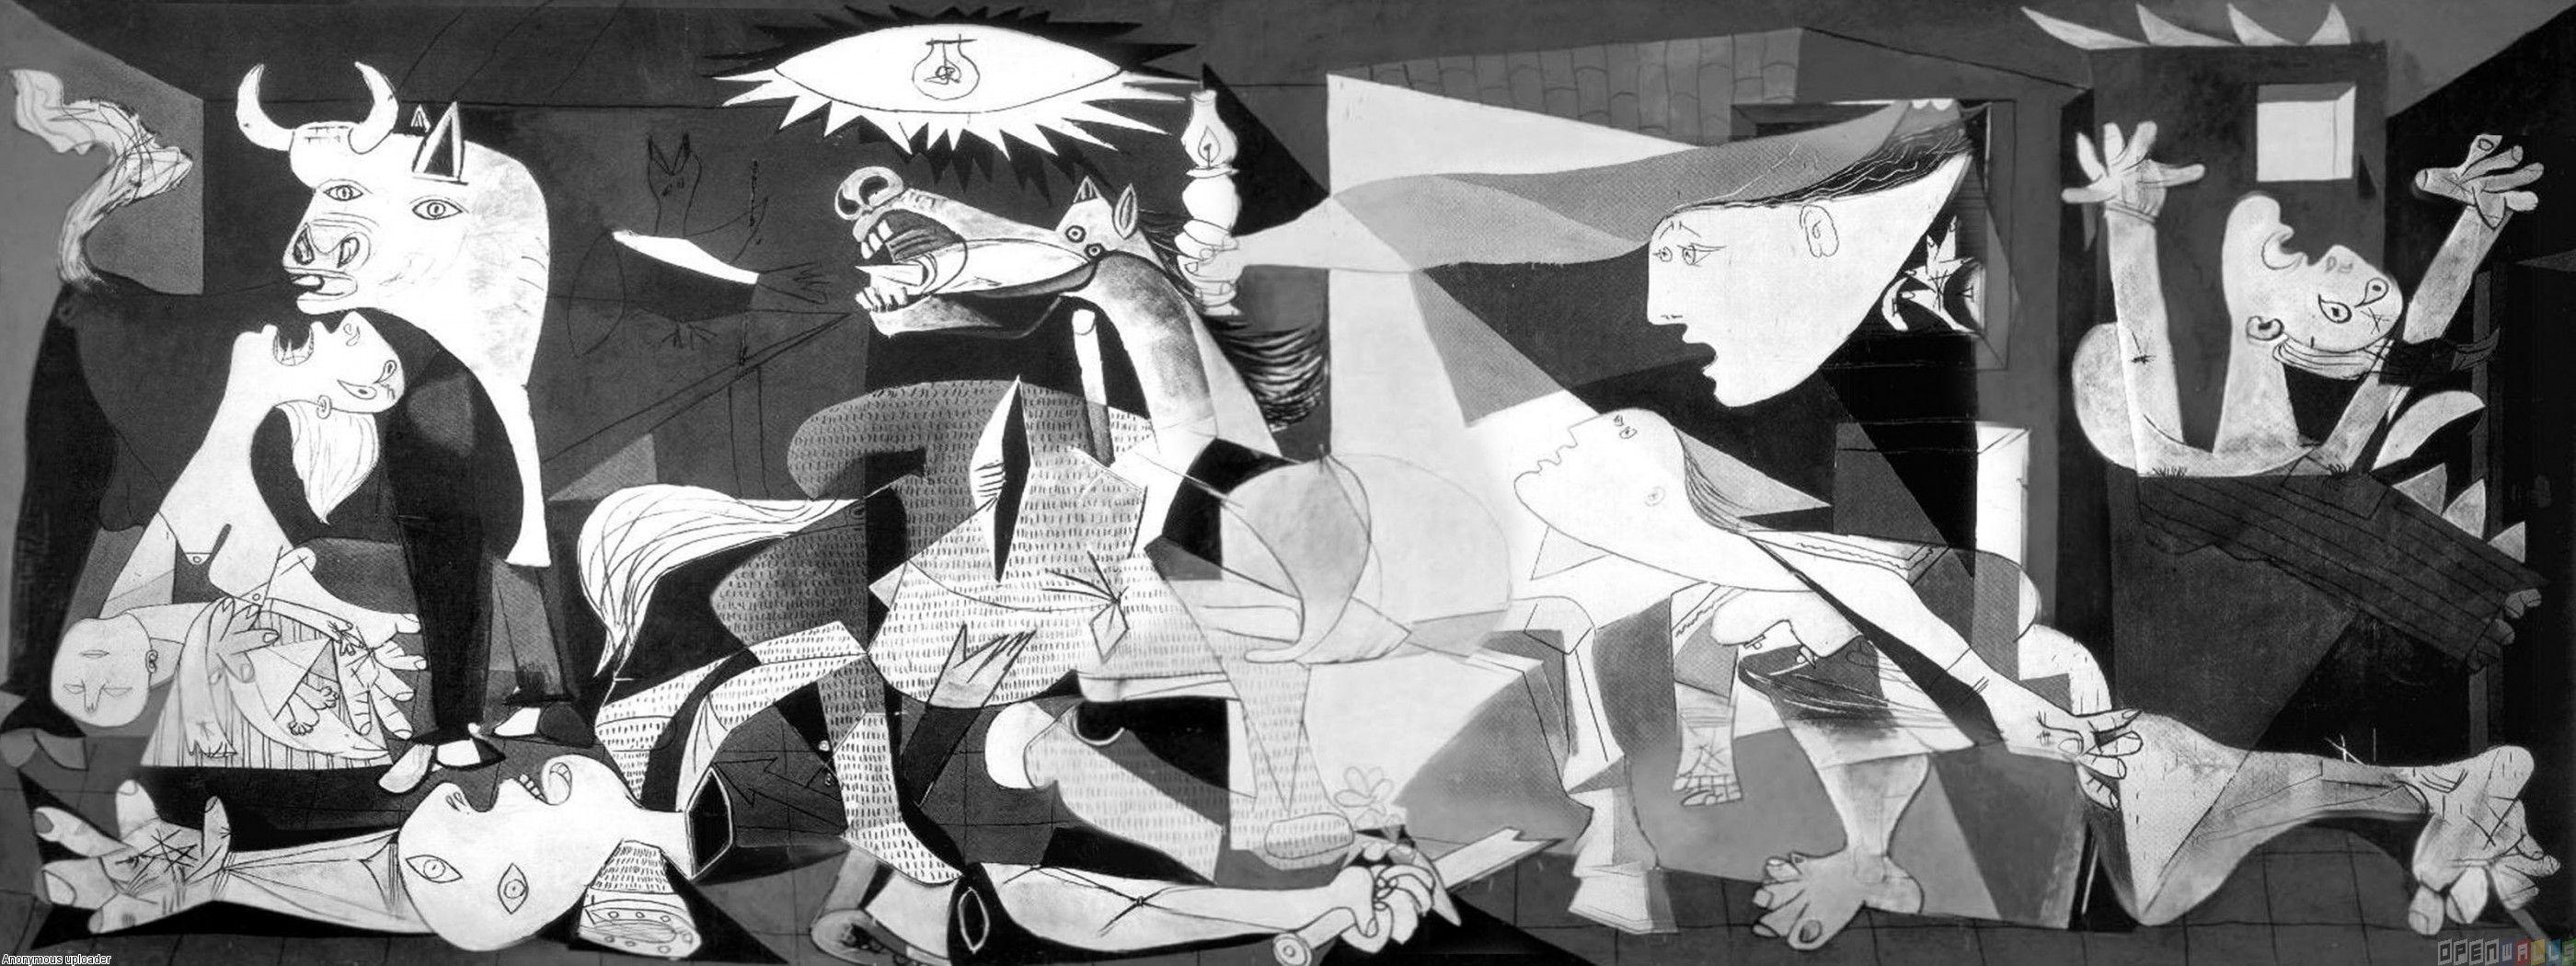 2800x1050 Guernica, painting by pablo picasso hình nền